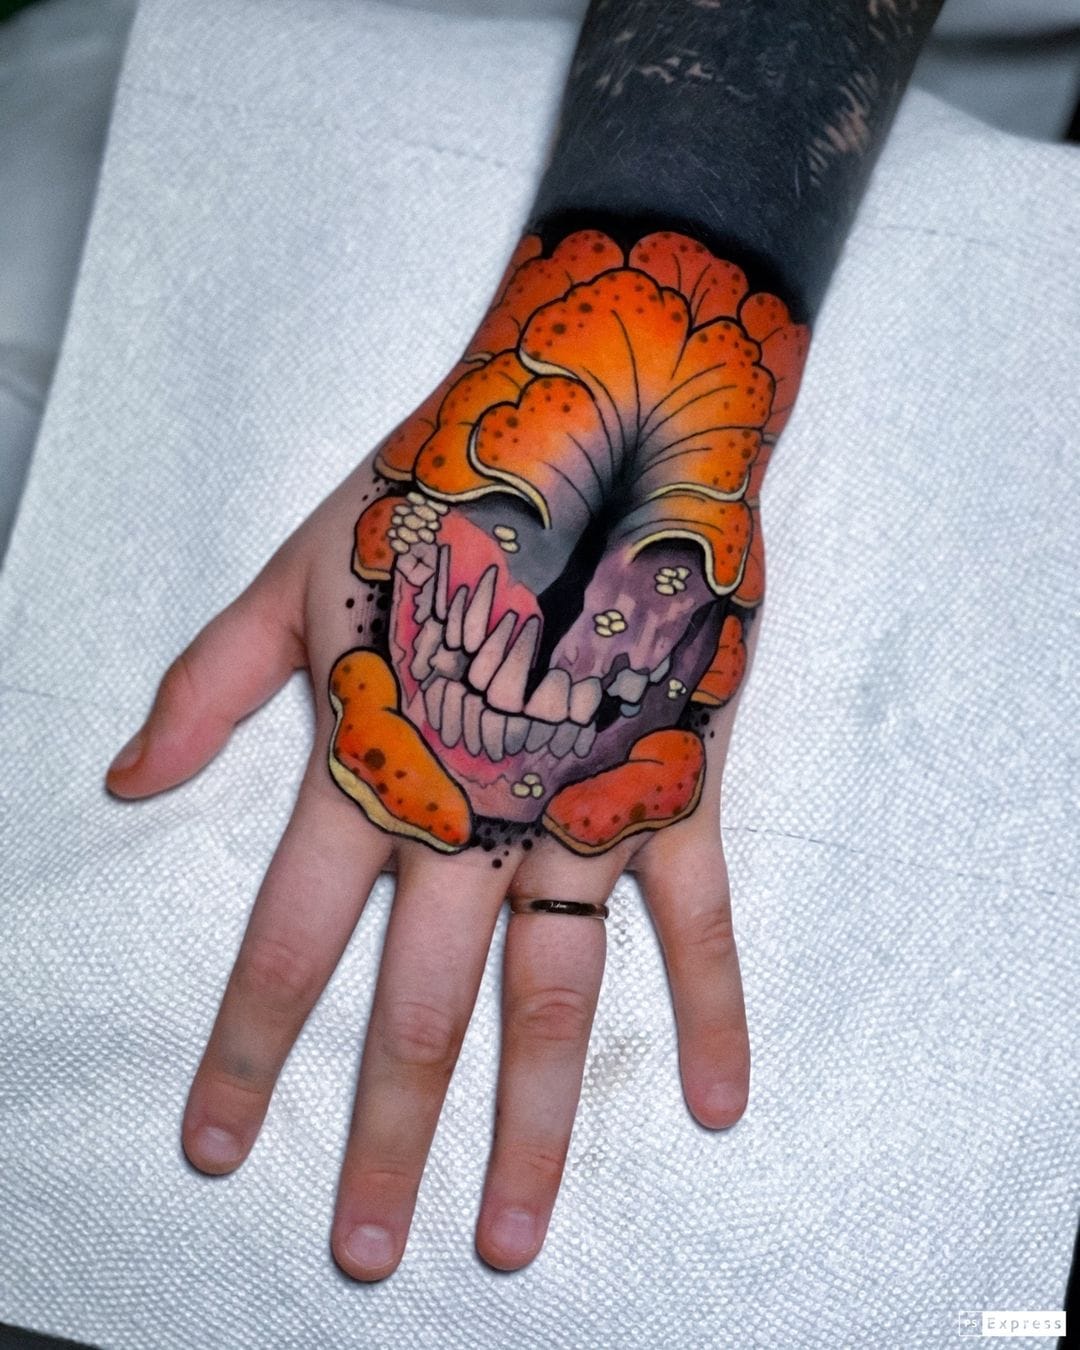 Tattoo Artist Says New Celebrity Trend Is Getting Inked Under Anesthesia